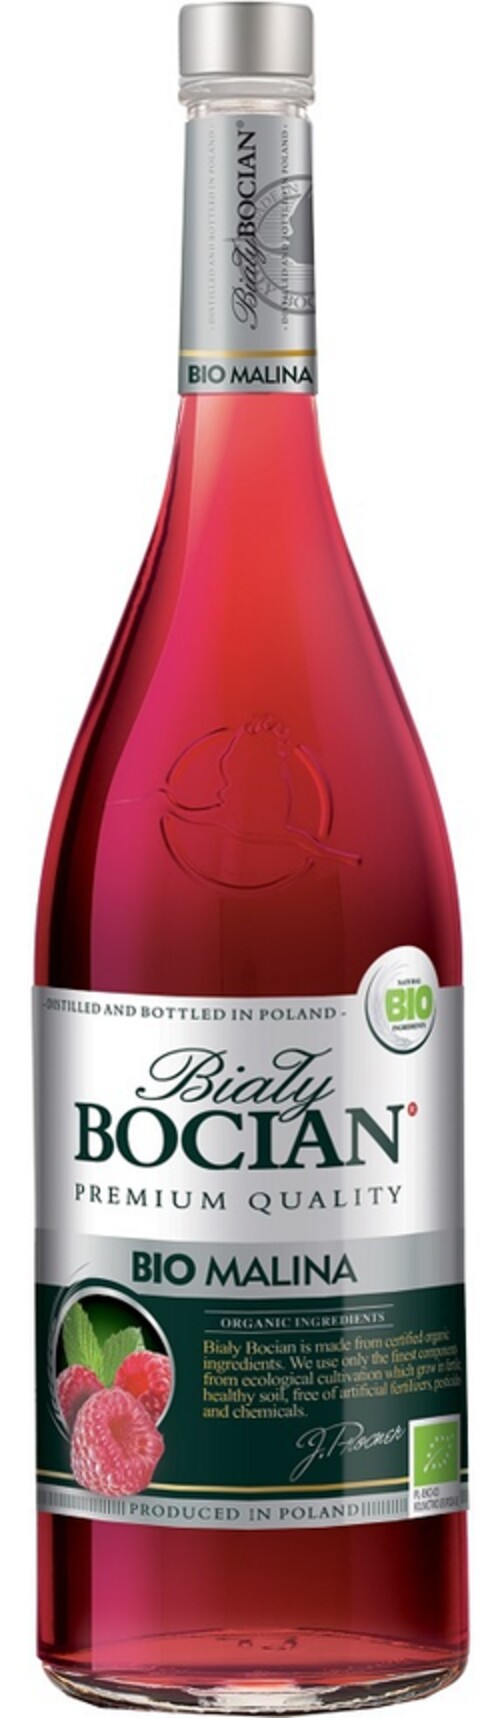 Biały BOCIAN BIO MALINA – DISTILLED AND BOTTLED IN POLAND – PREMIUM QUALITY – ORGANIC INGREDIENTS Biały Bocian is made from certified organic ingredients. We use only the finest components from ecological cultivation which grow in healthy soil, free of artificial fertilisers, pesticides and chemicals. PRODUCED IN POLAND Logo (EUIPO, 31.05.2019)